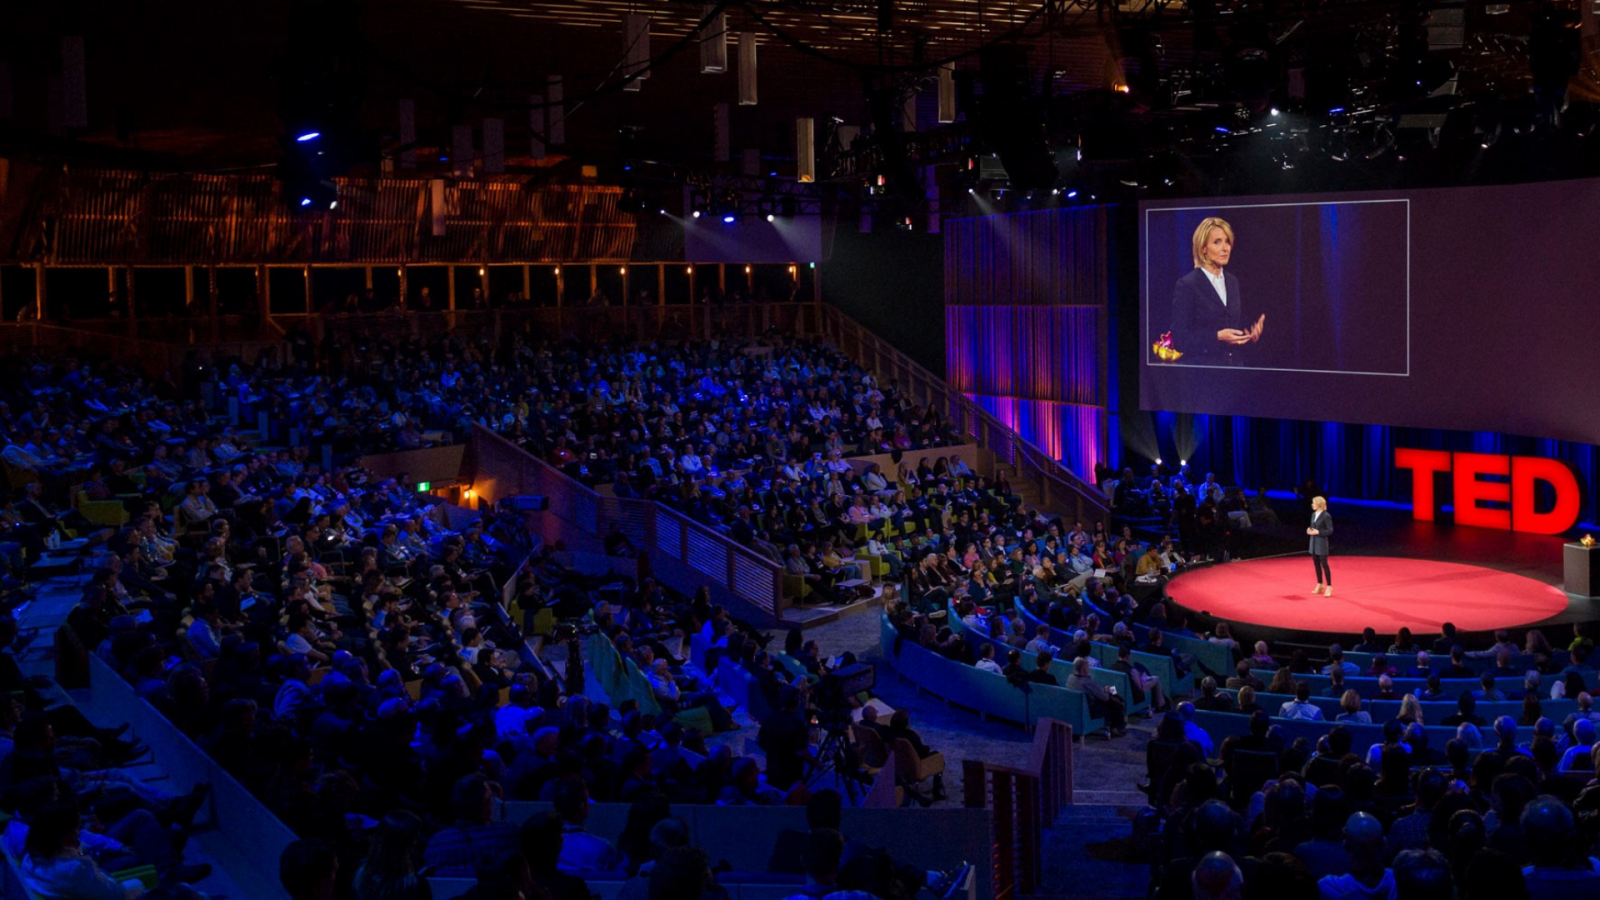 Top 5 Best TED Talks On How to Have Better Meetings